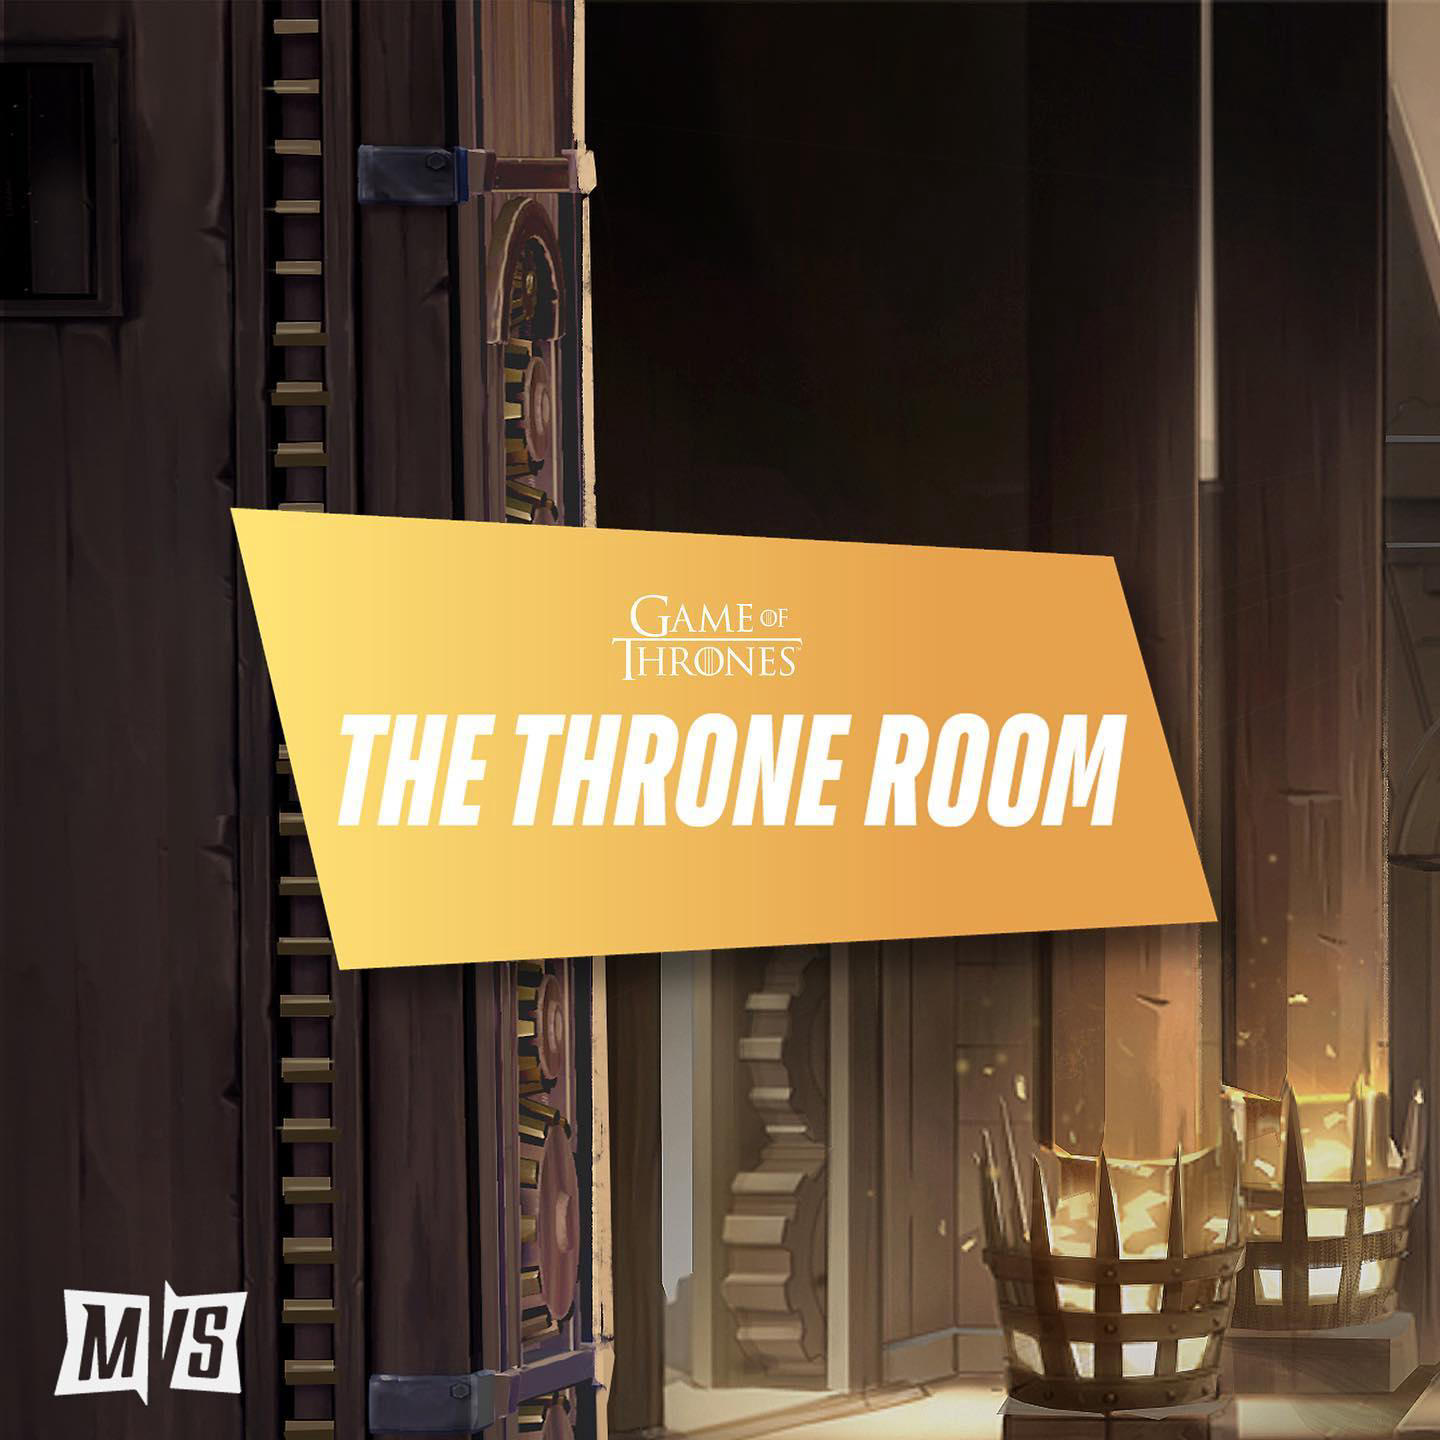 WB Games - The Throne Room is here